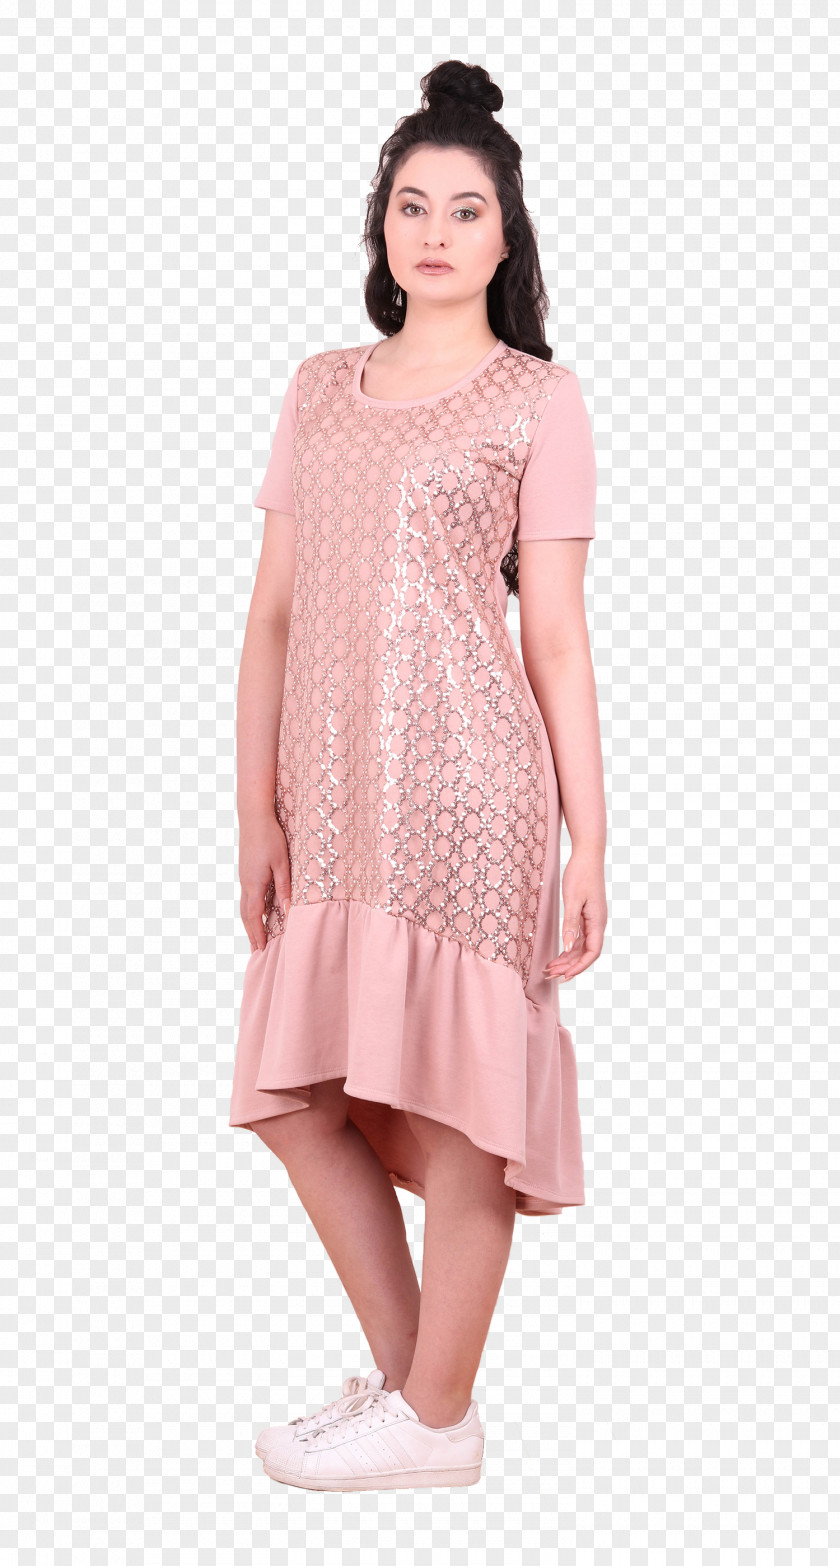 Dress Sleeve Fashion Top Clothing PNG